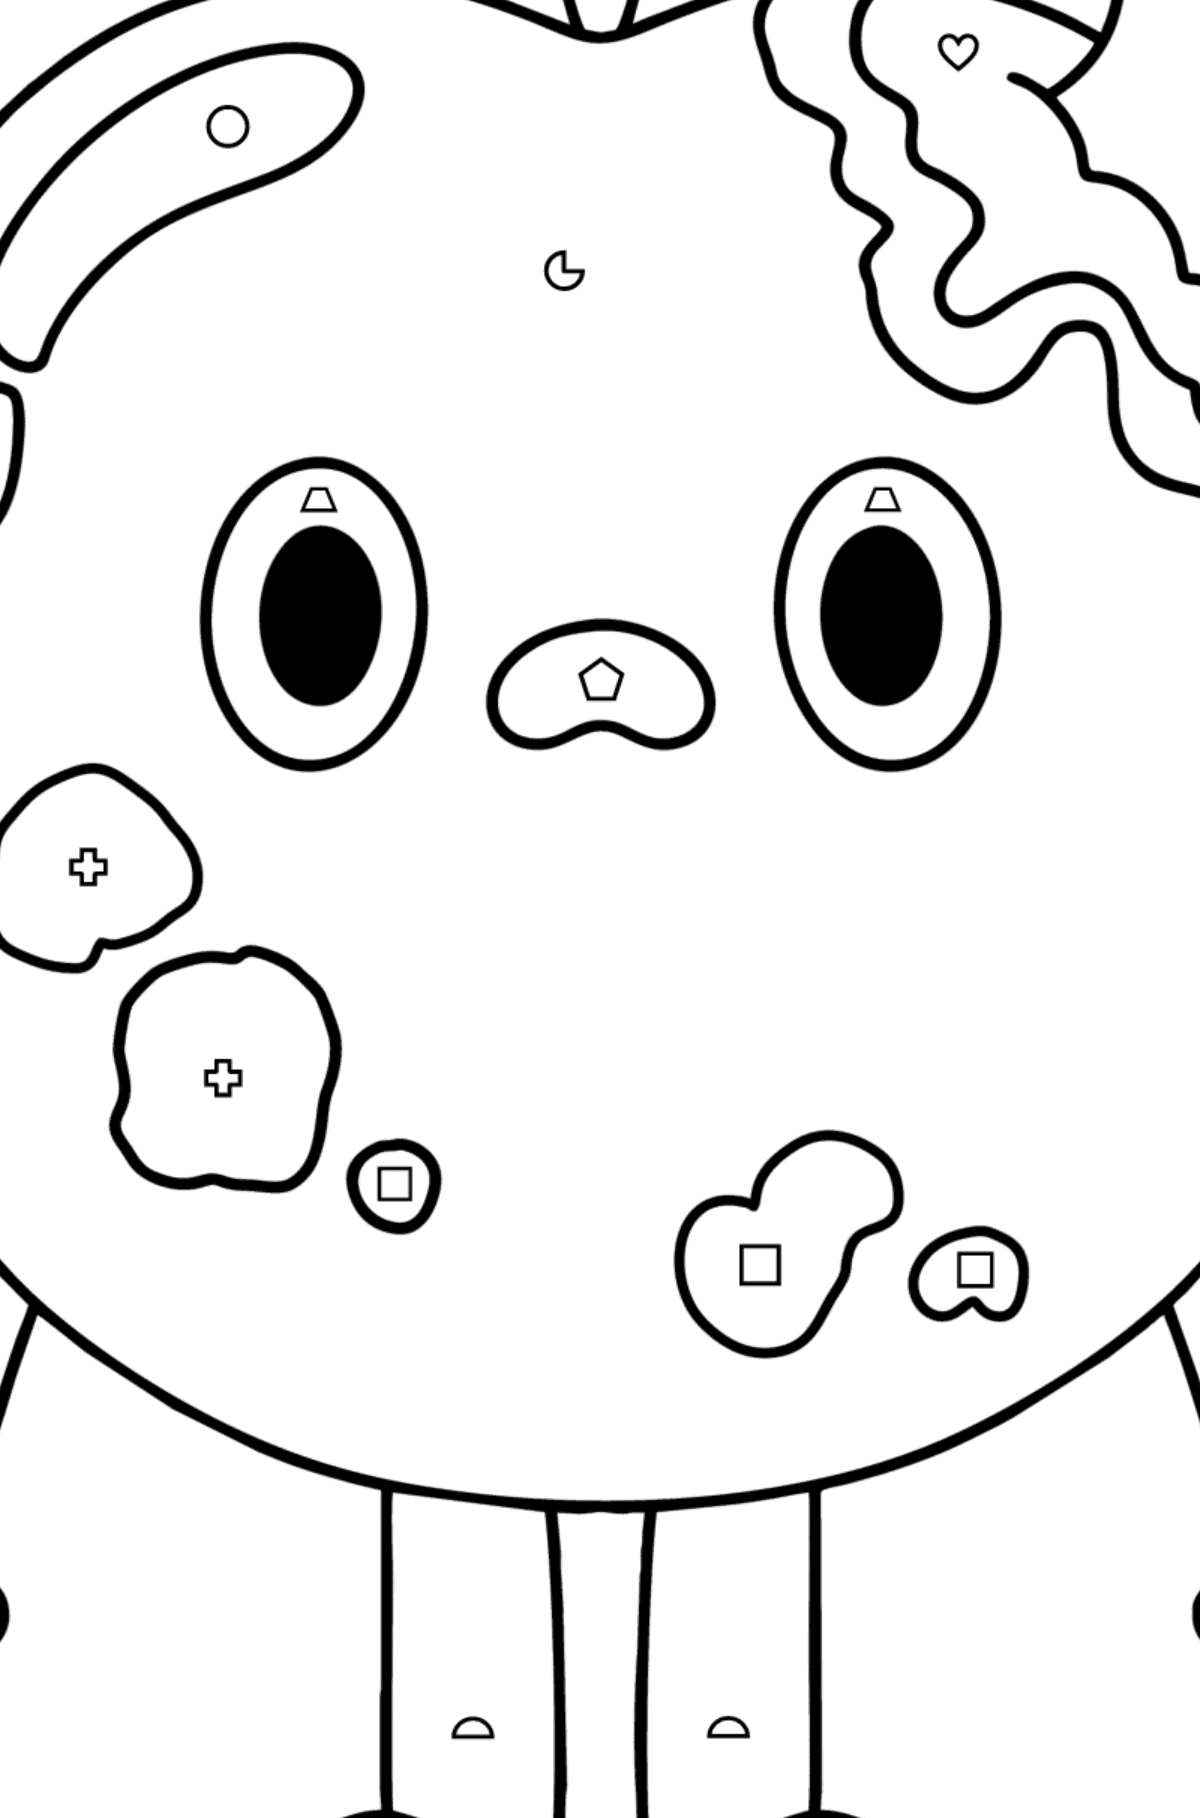 Coloring page Tocaboca heroes 02 - Coloring by Geometric Shapes for Kids